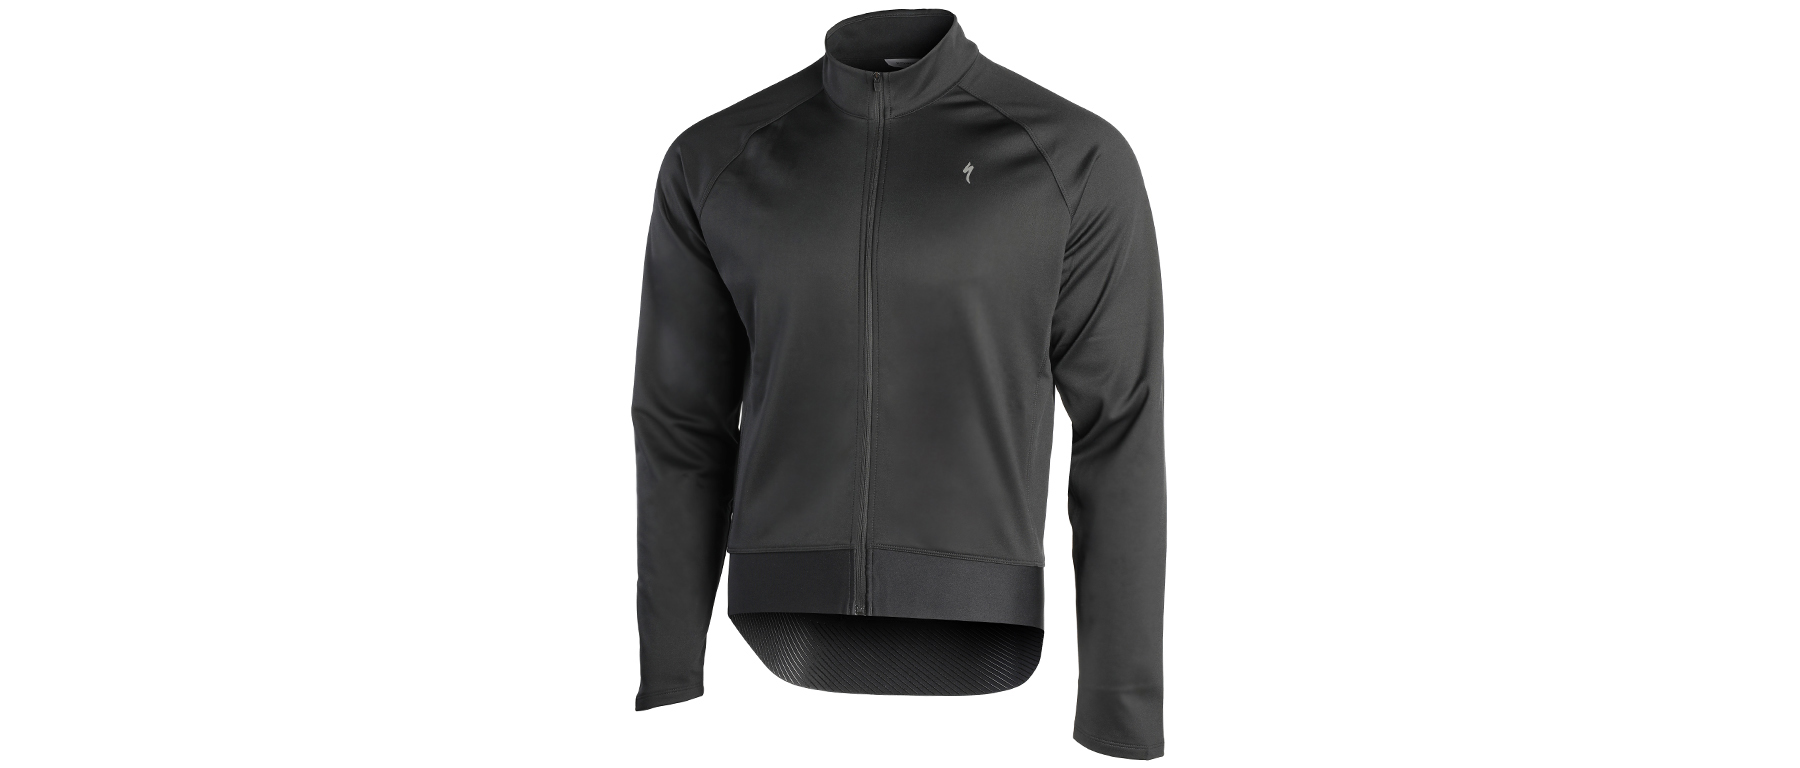 Specialized RBX Expert Thermal LS Jersey